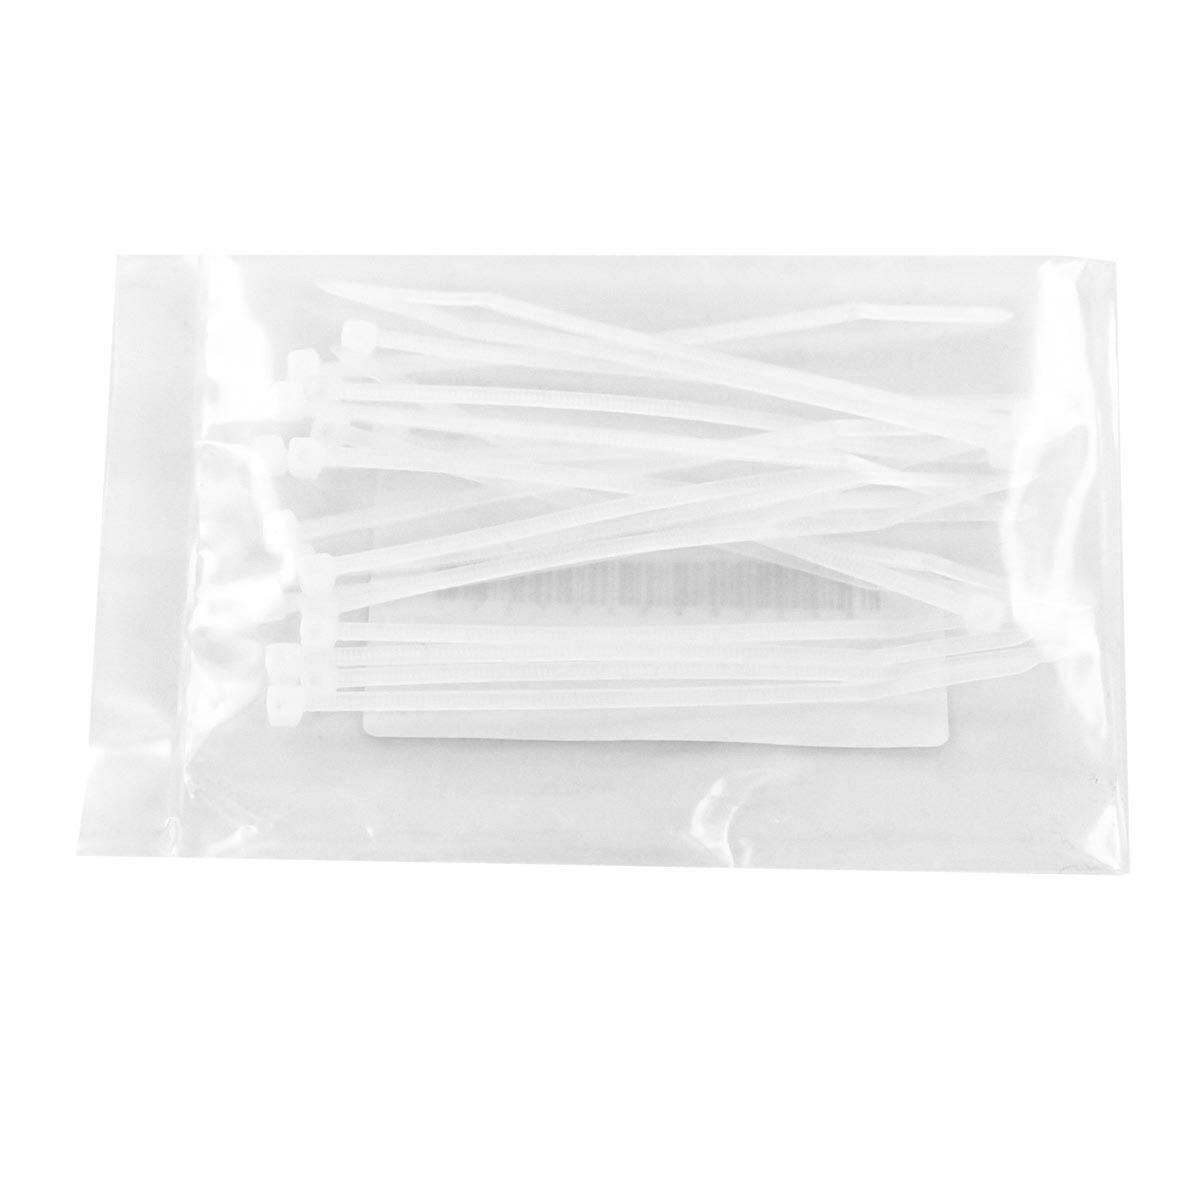 100mm x 2.5mm White Cable Ties, 20pcs image 3